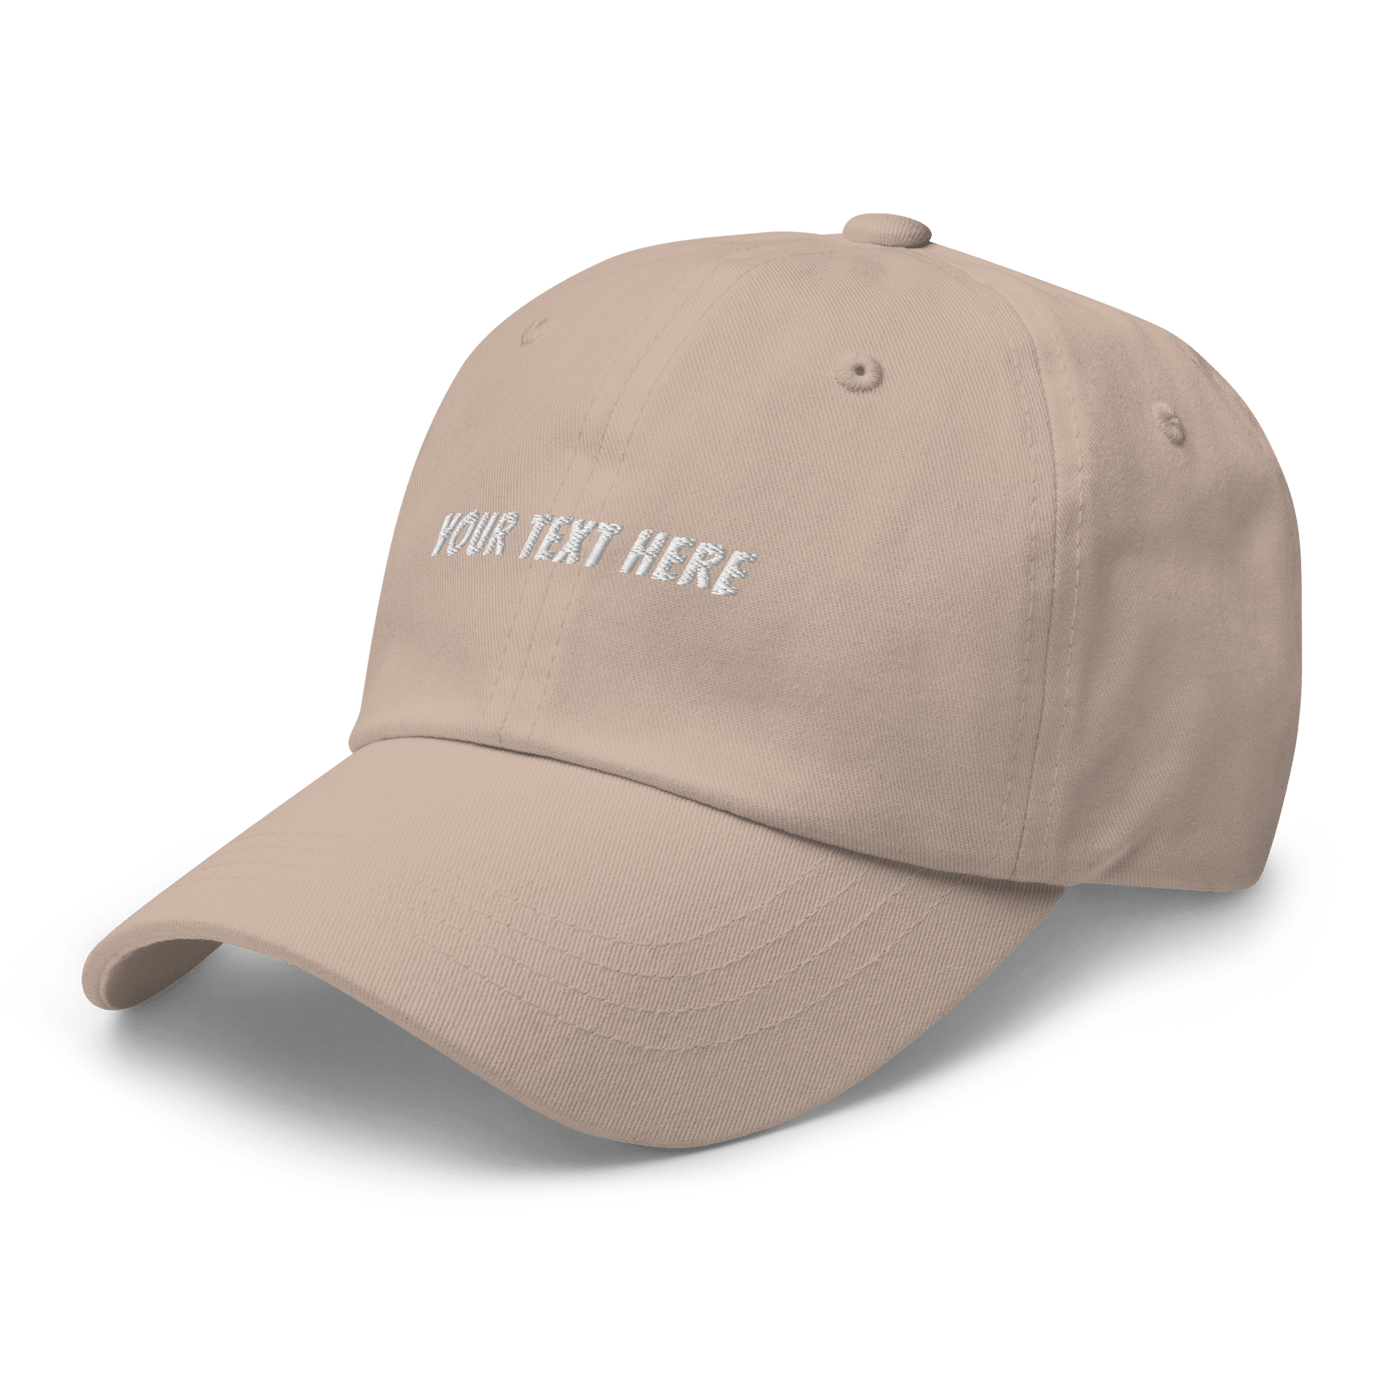 Customize Your Own Dad hat - Banger Font - Khaki - - Just Another Cap Store